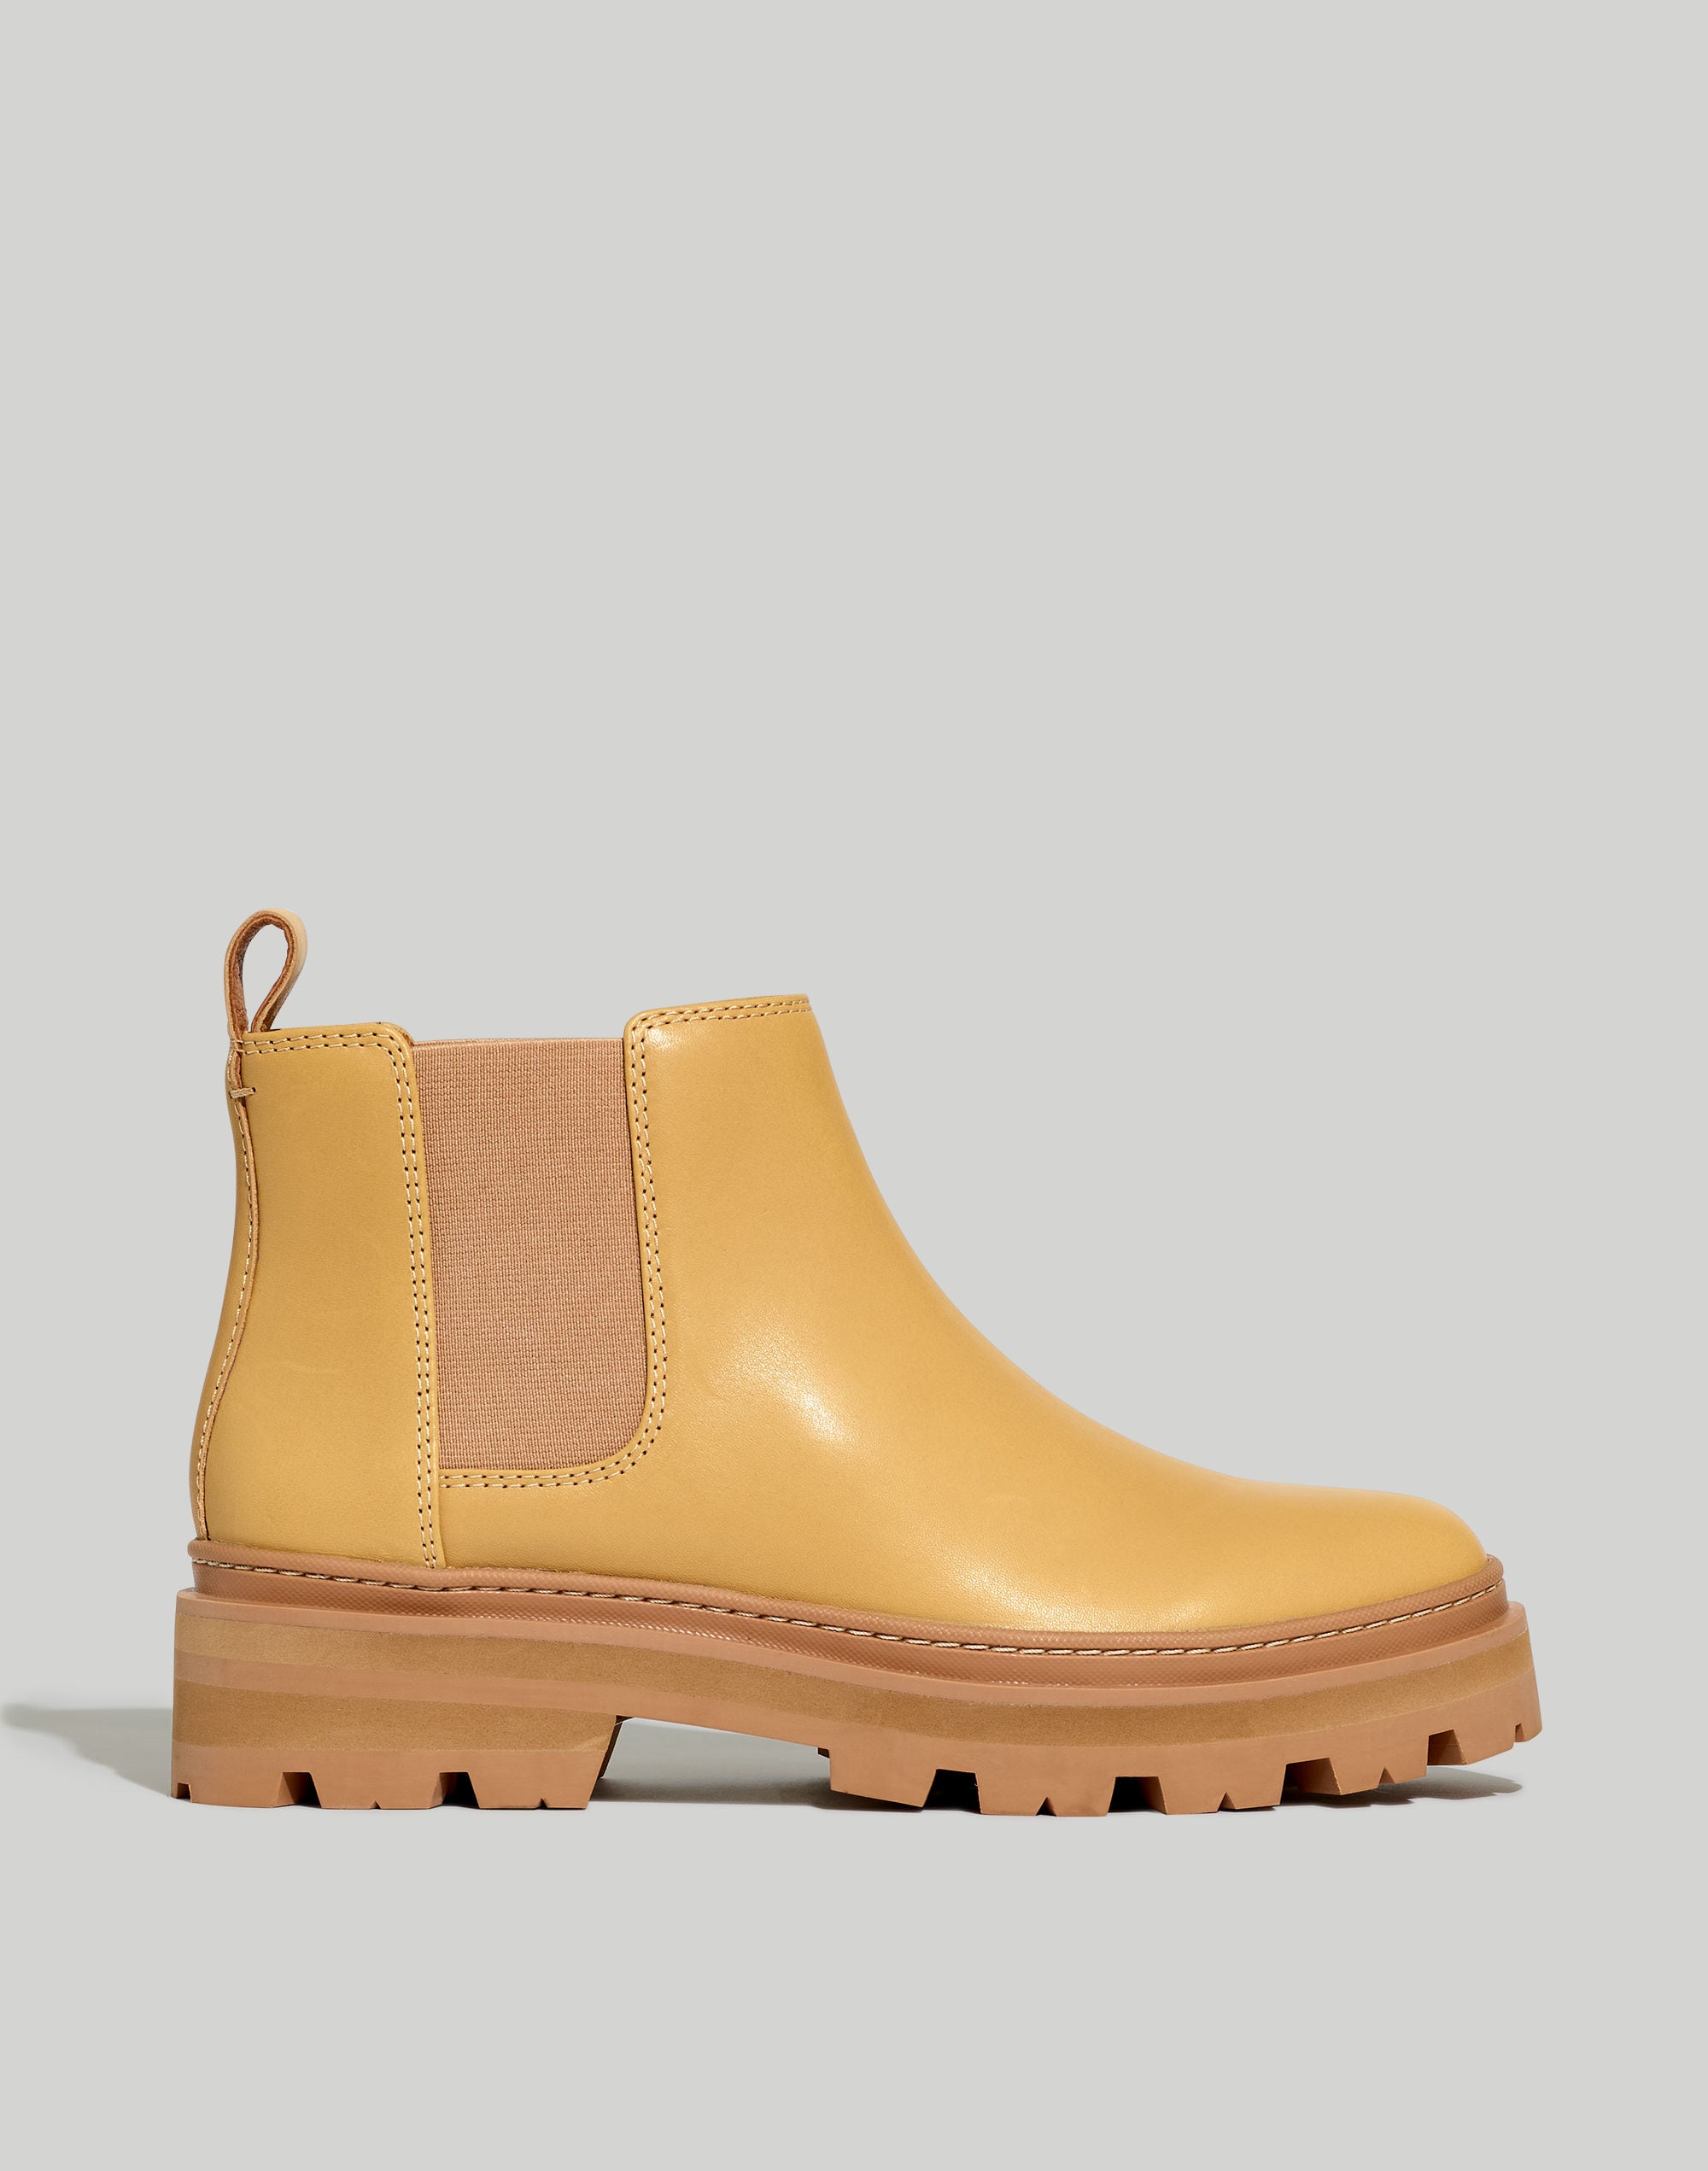 The Mariam Chelsea Boot in Leather